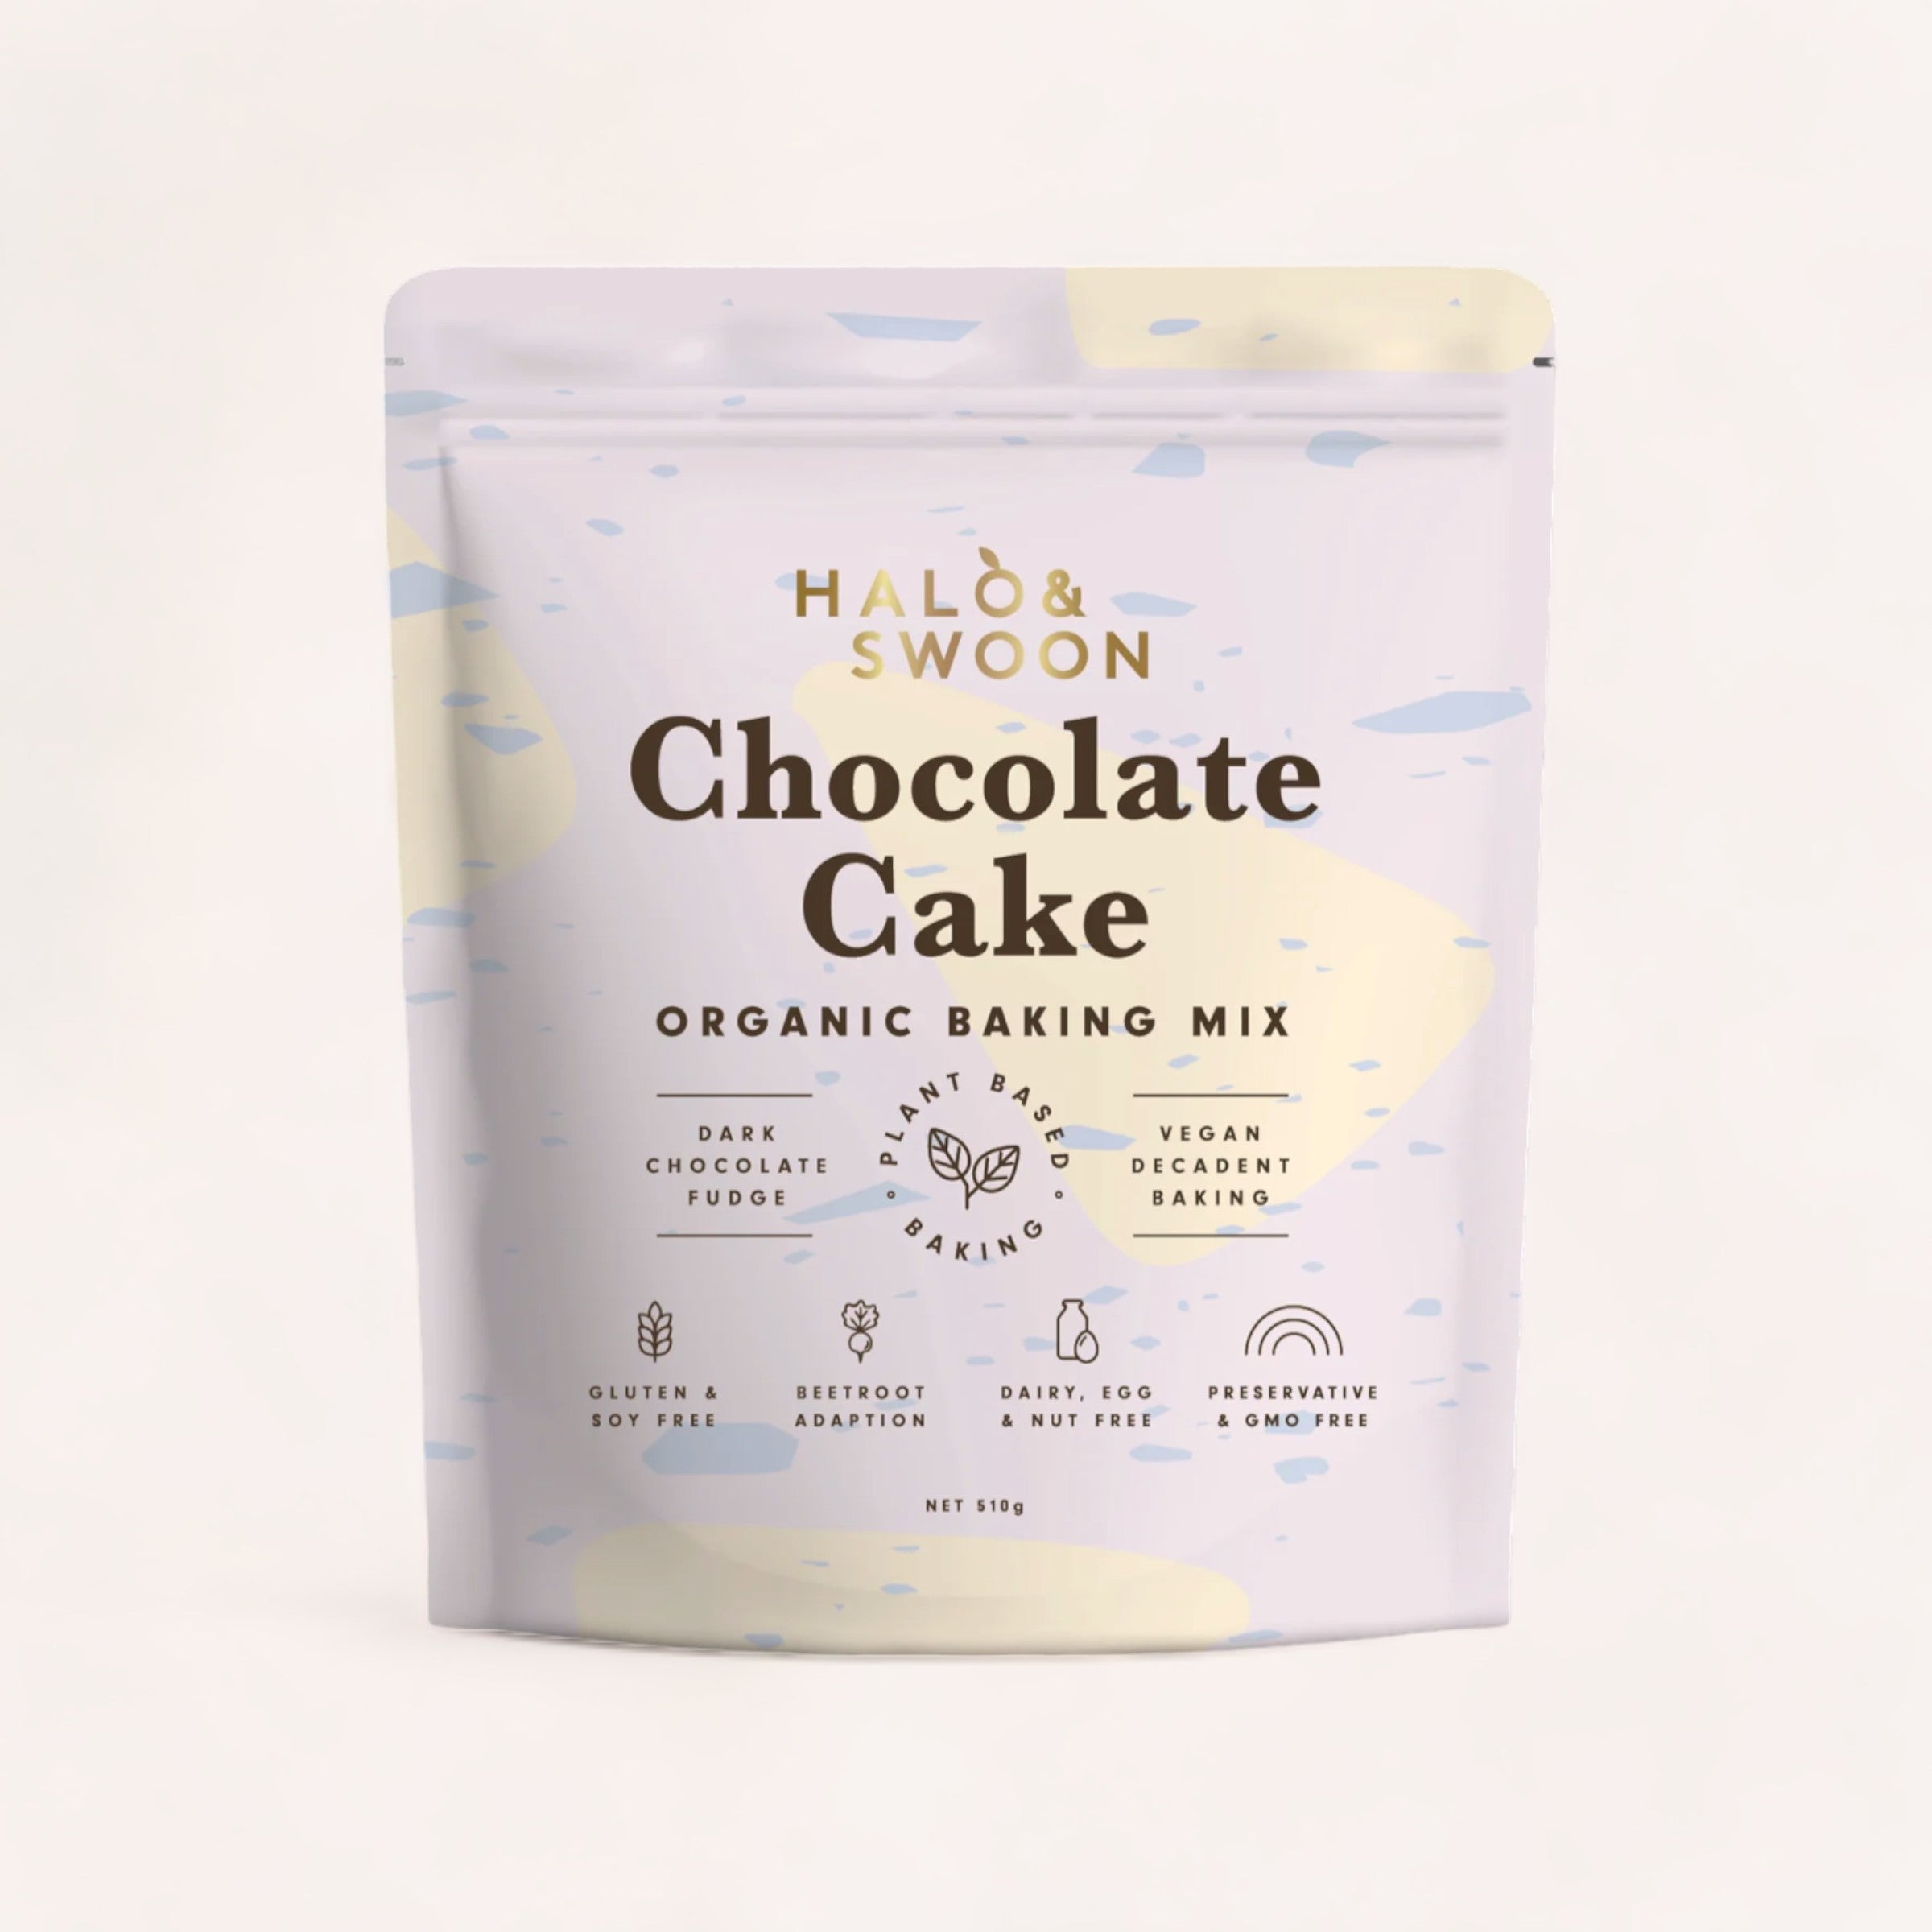 Halo & Swoon Chocolate Cake Mix organic baking mix package with a minimalist and clean design, highlighting features like "vegan," "gluten-free," "no soy lecithin,